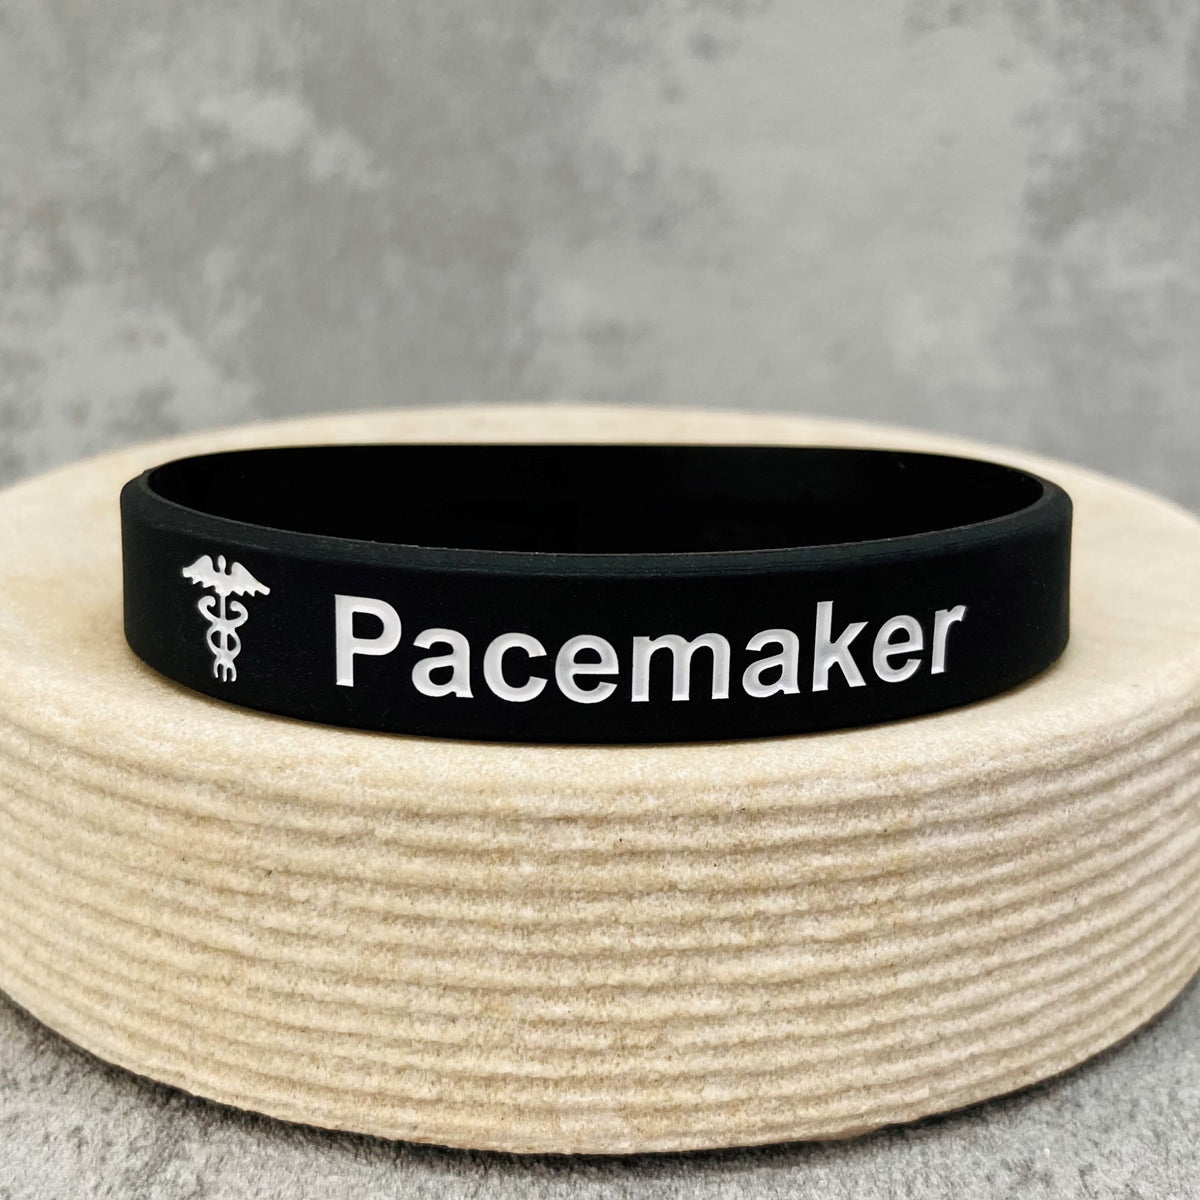 casual pacemaker wristband medical alert band